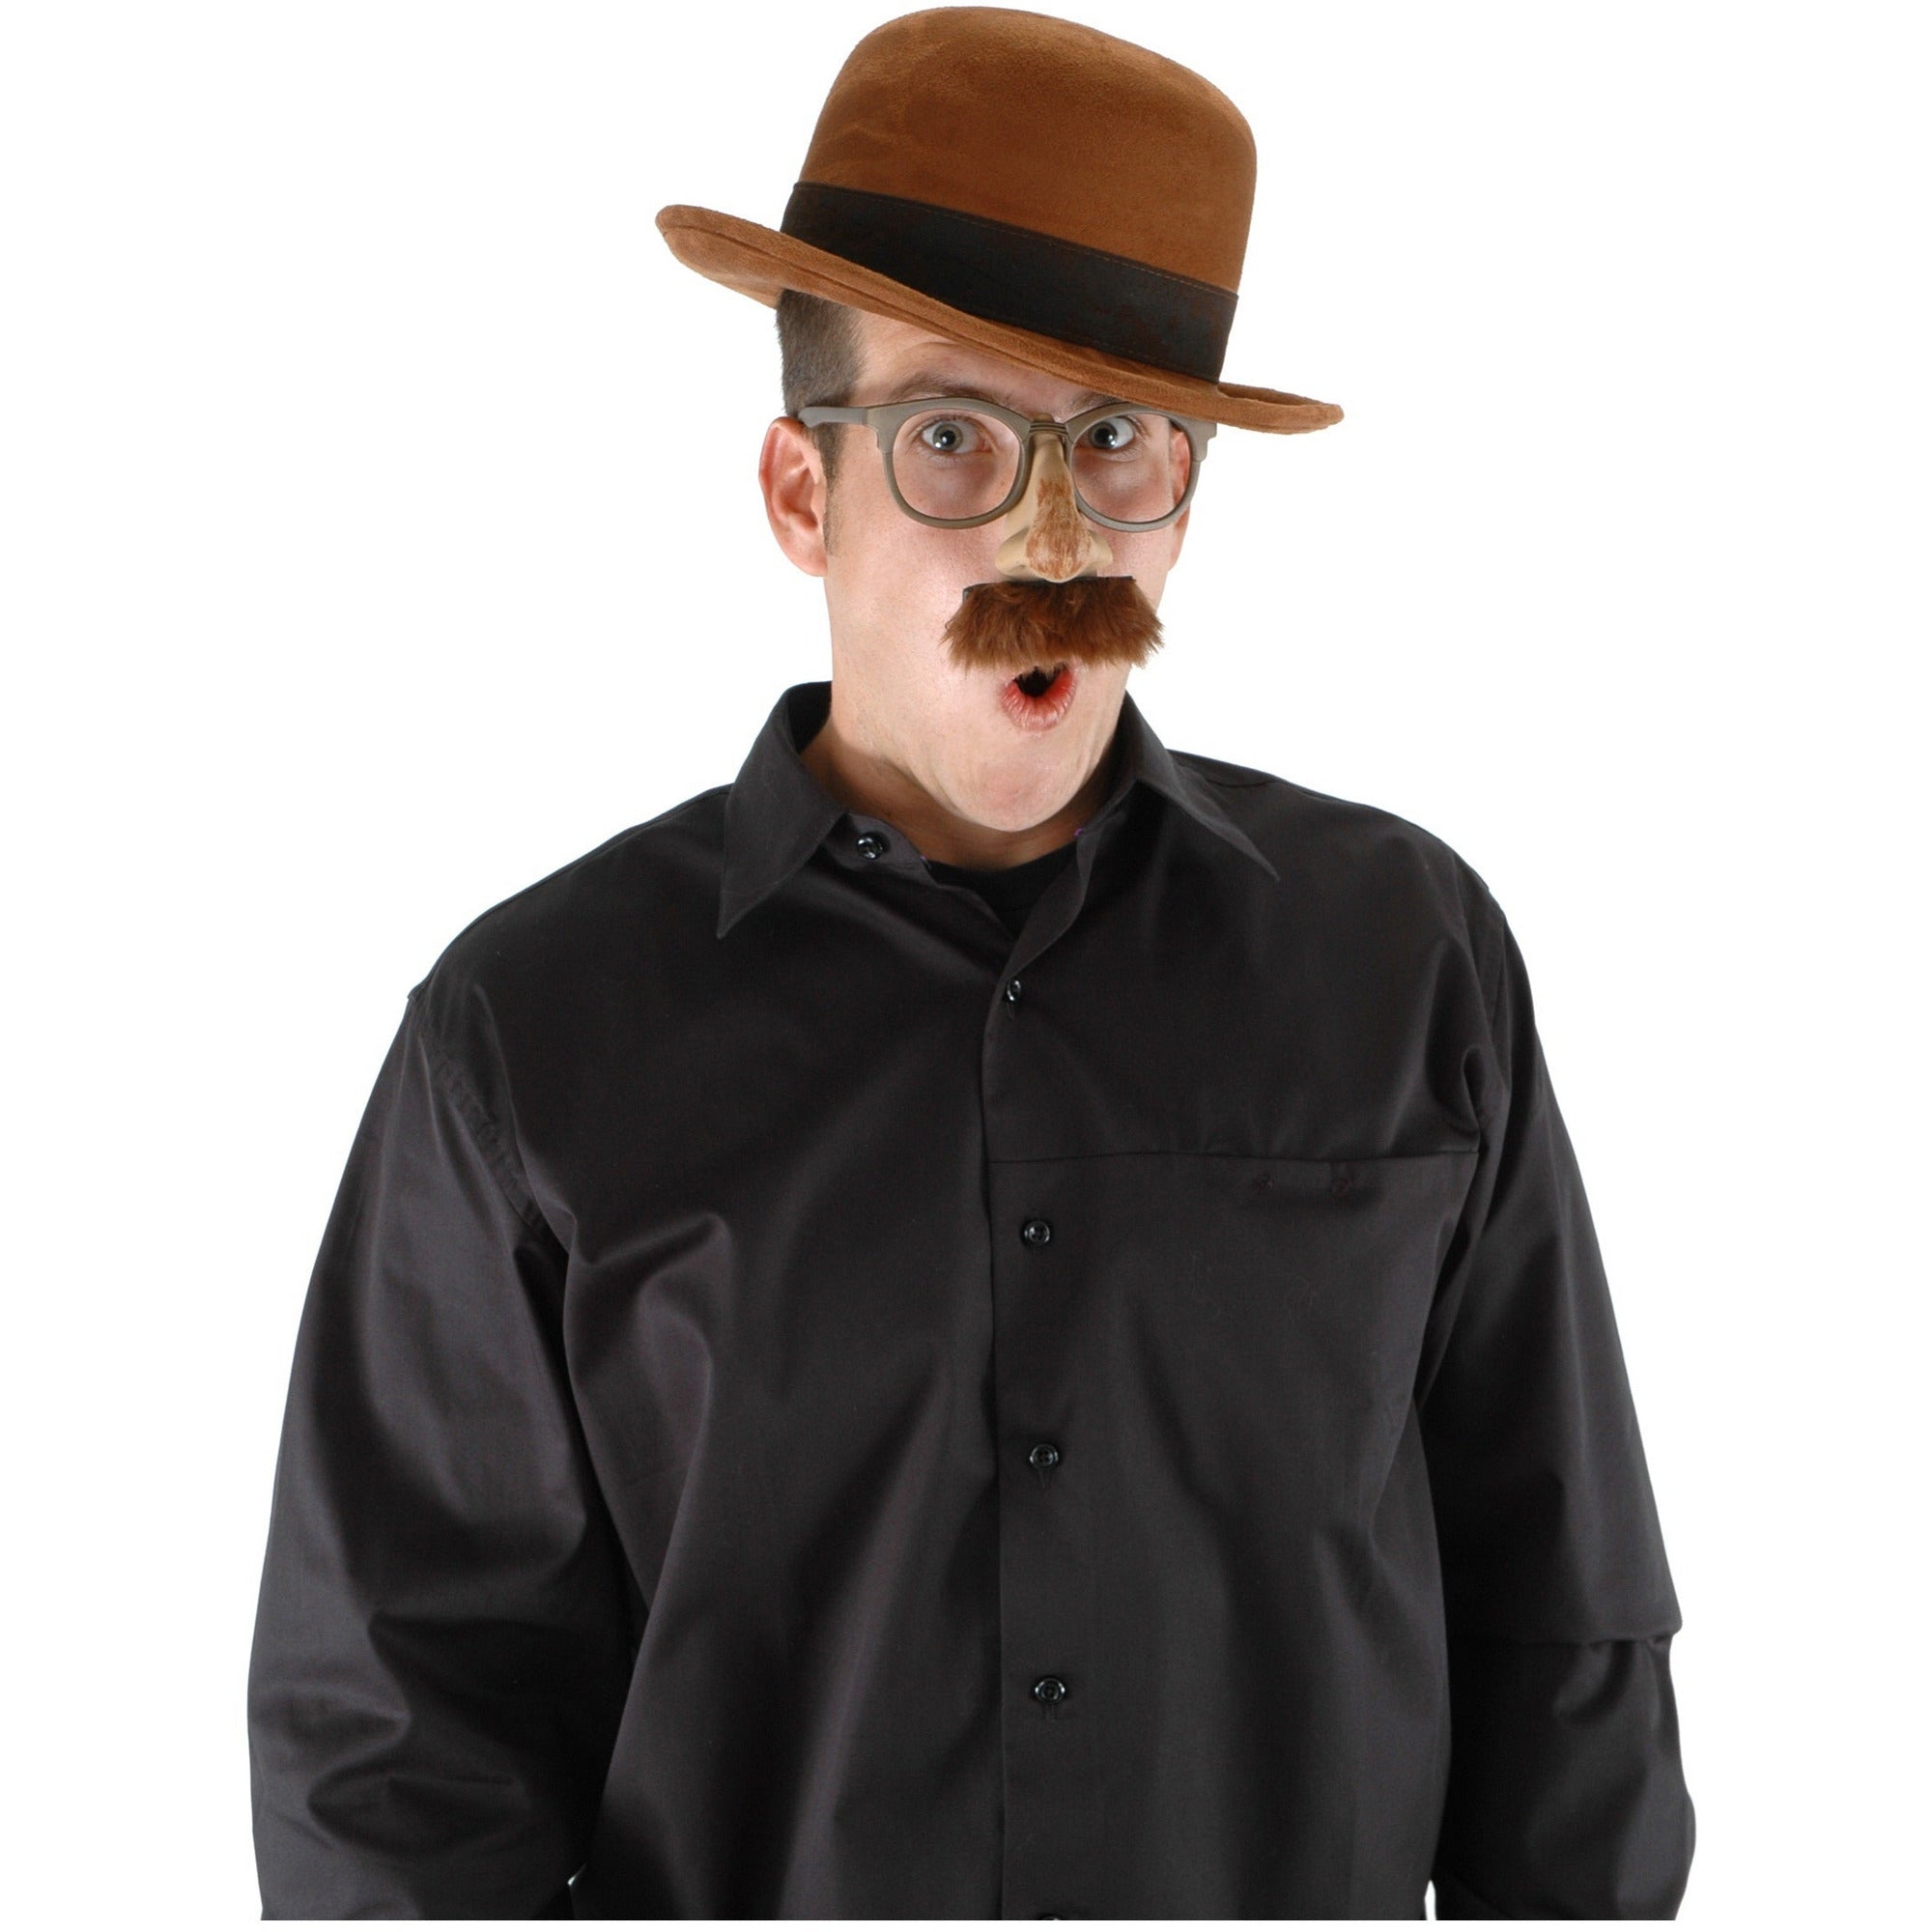 Elope COSTUMES: HATS Brown Velour Bowler Hat